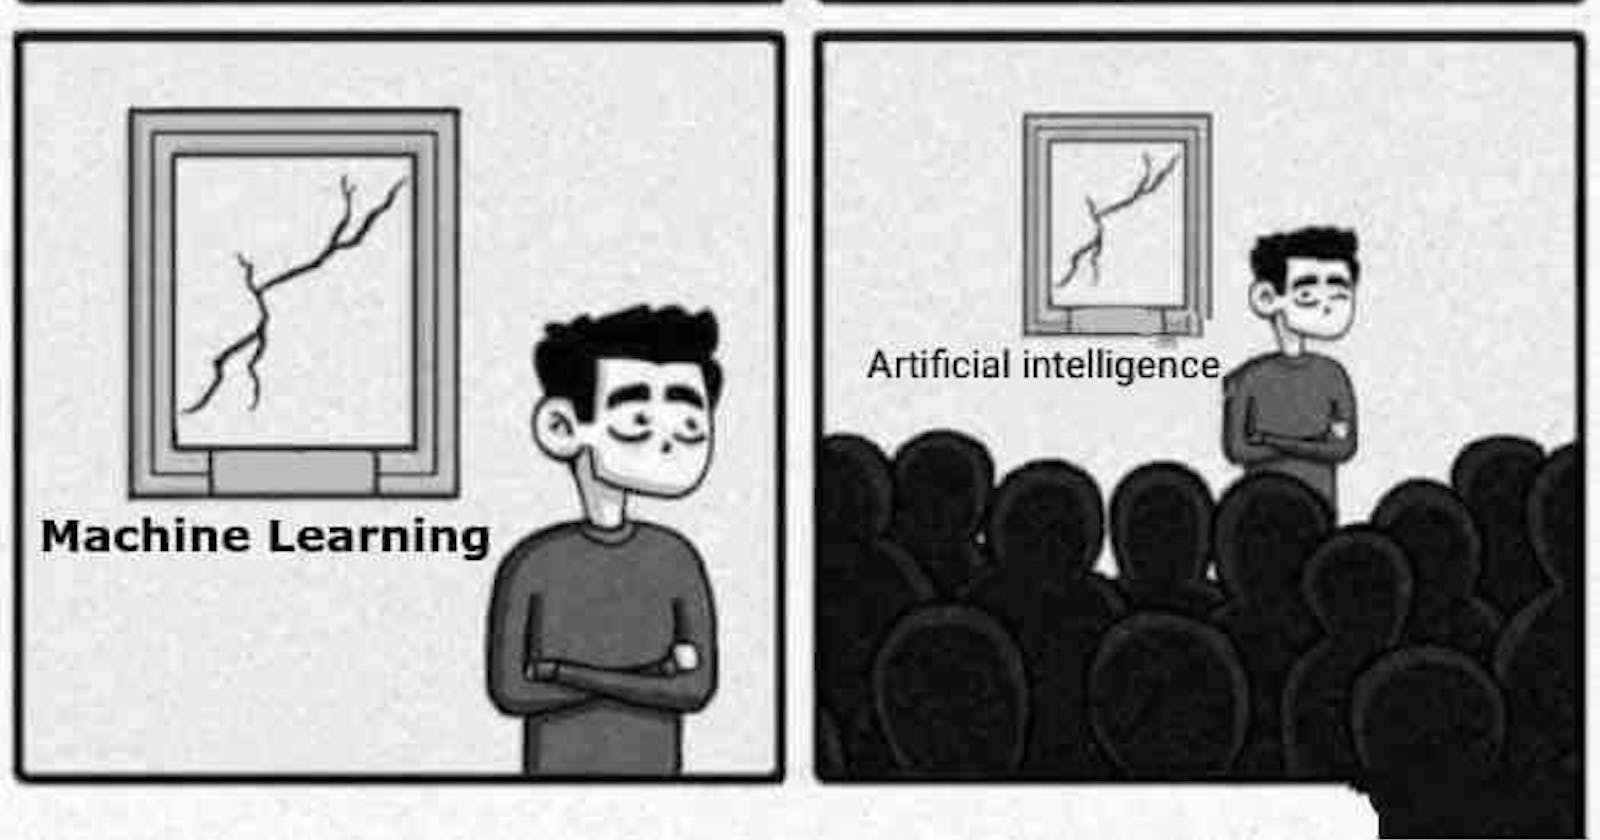 My journey so far with Artificial Intelligence...